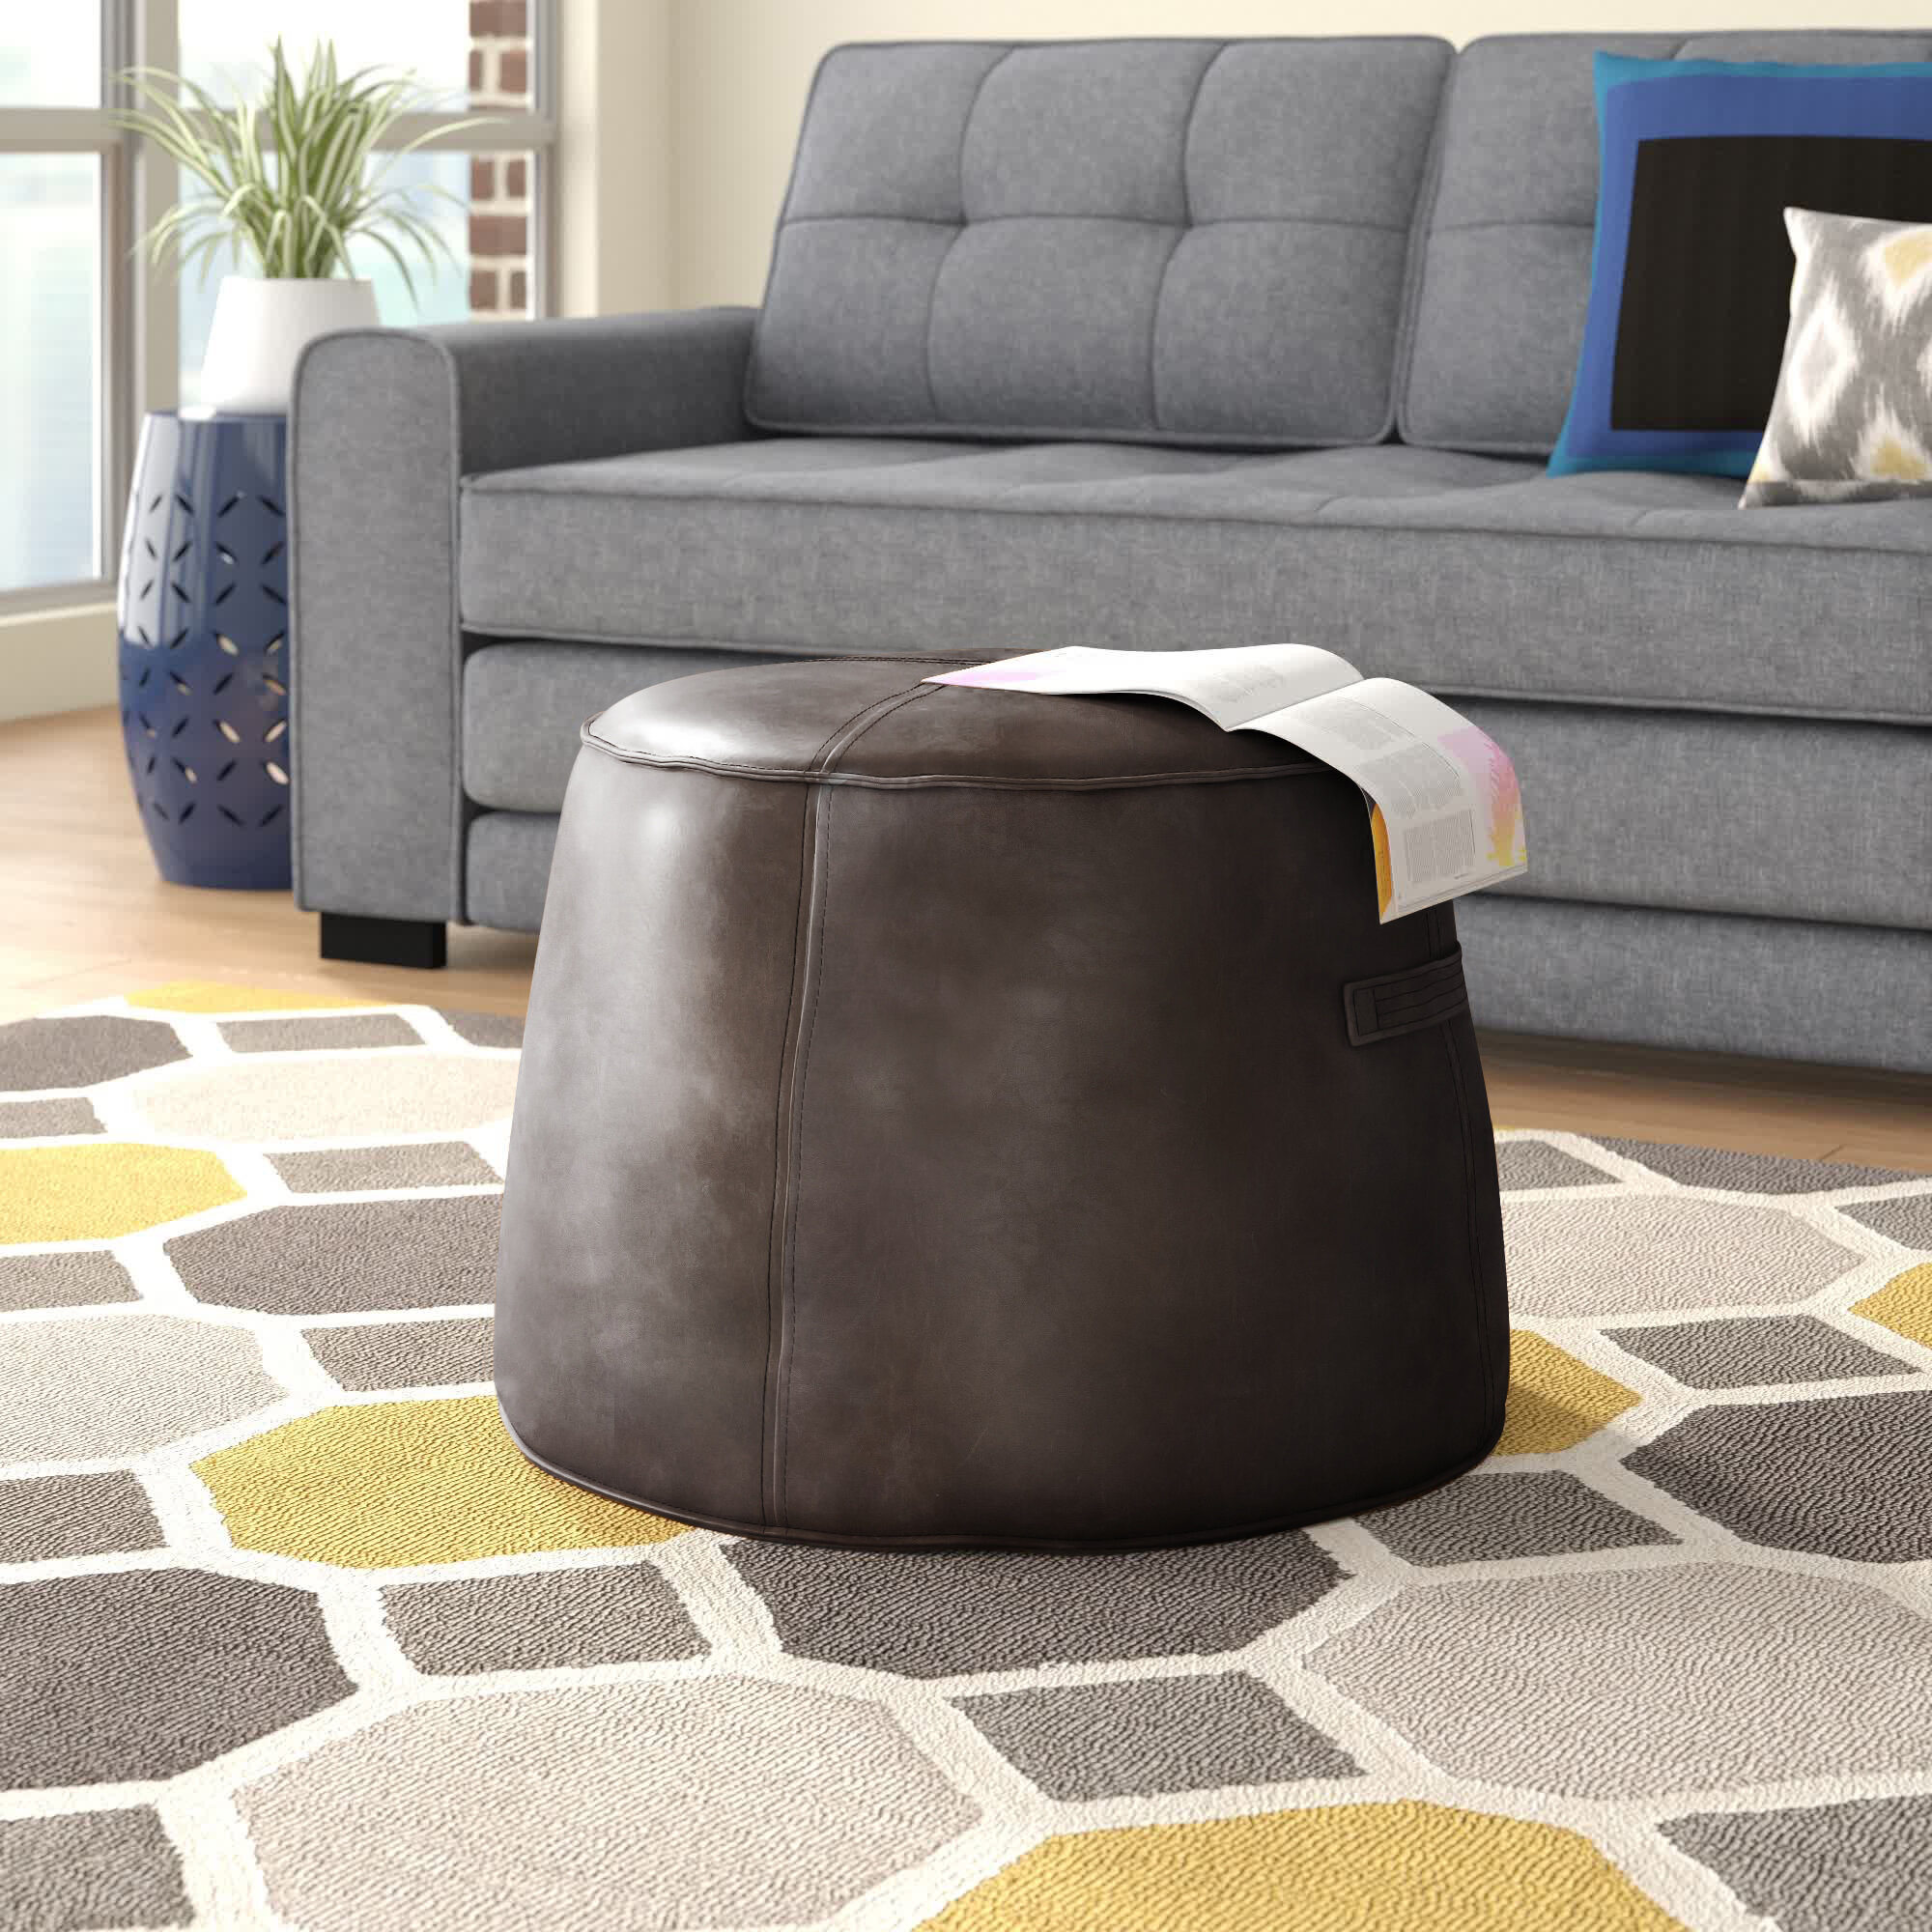 Round Faux Leather Footstool Living Room Footrest Bean Bags Foot Stool Pouffe 